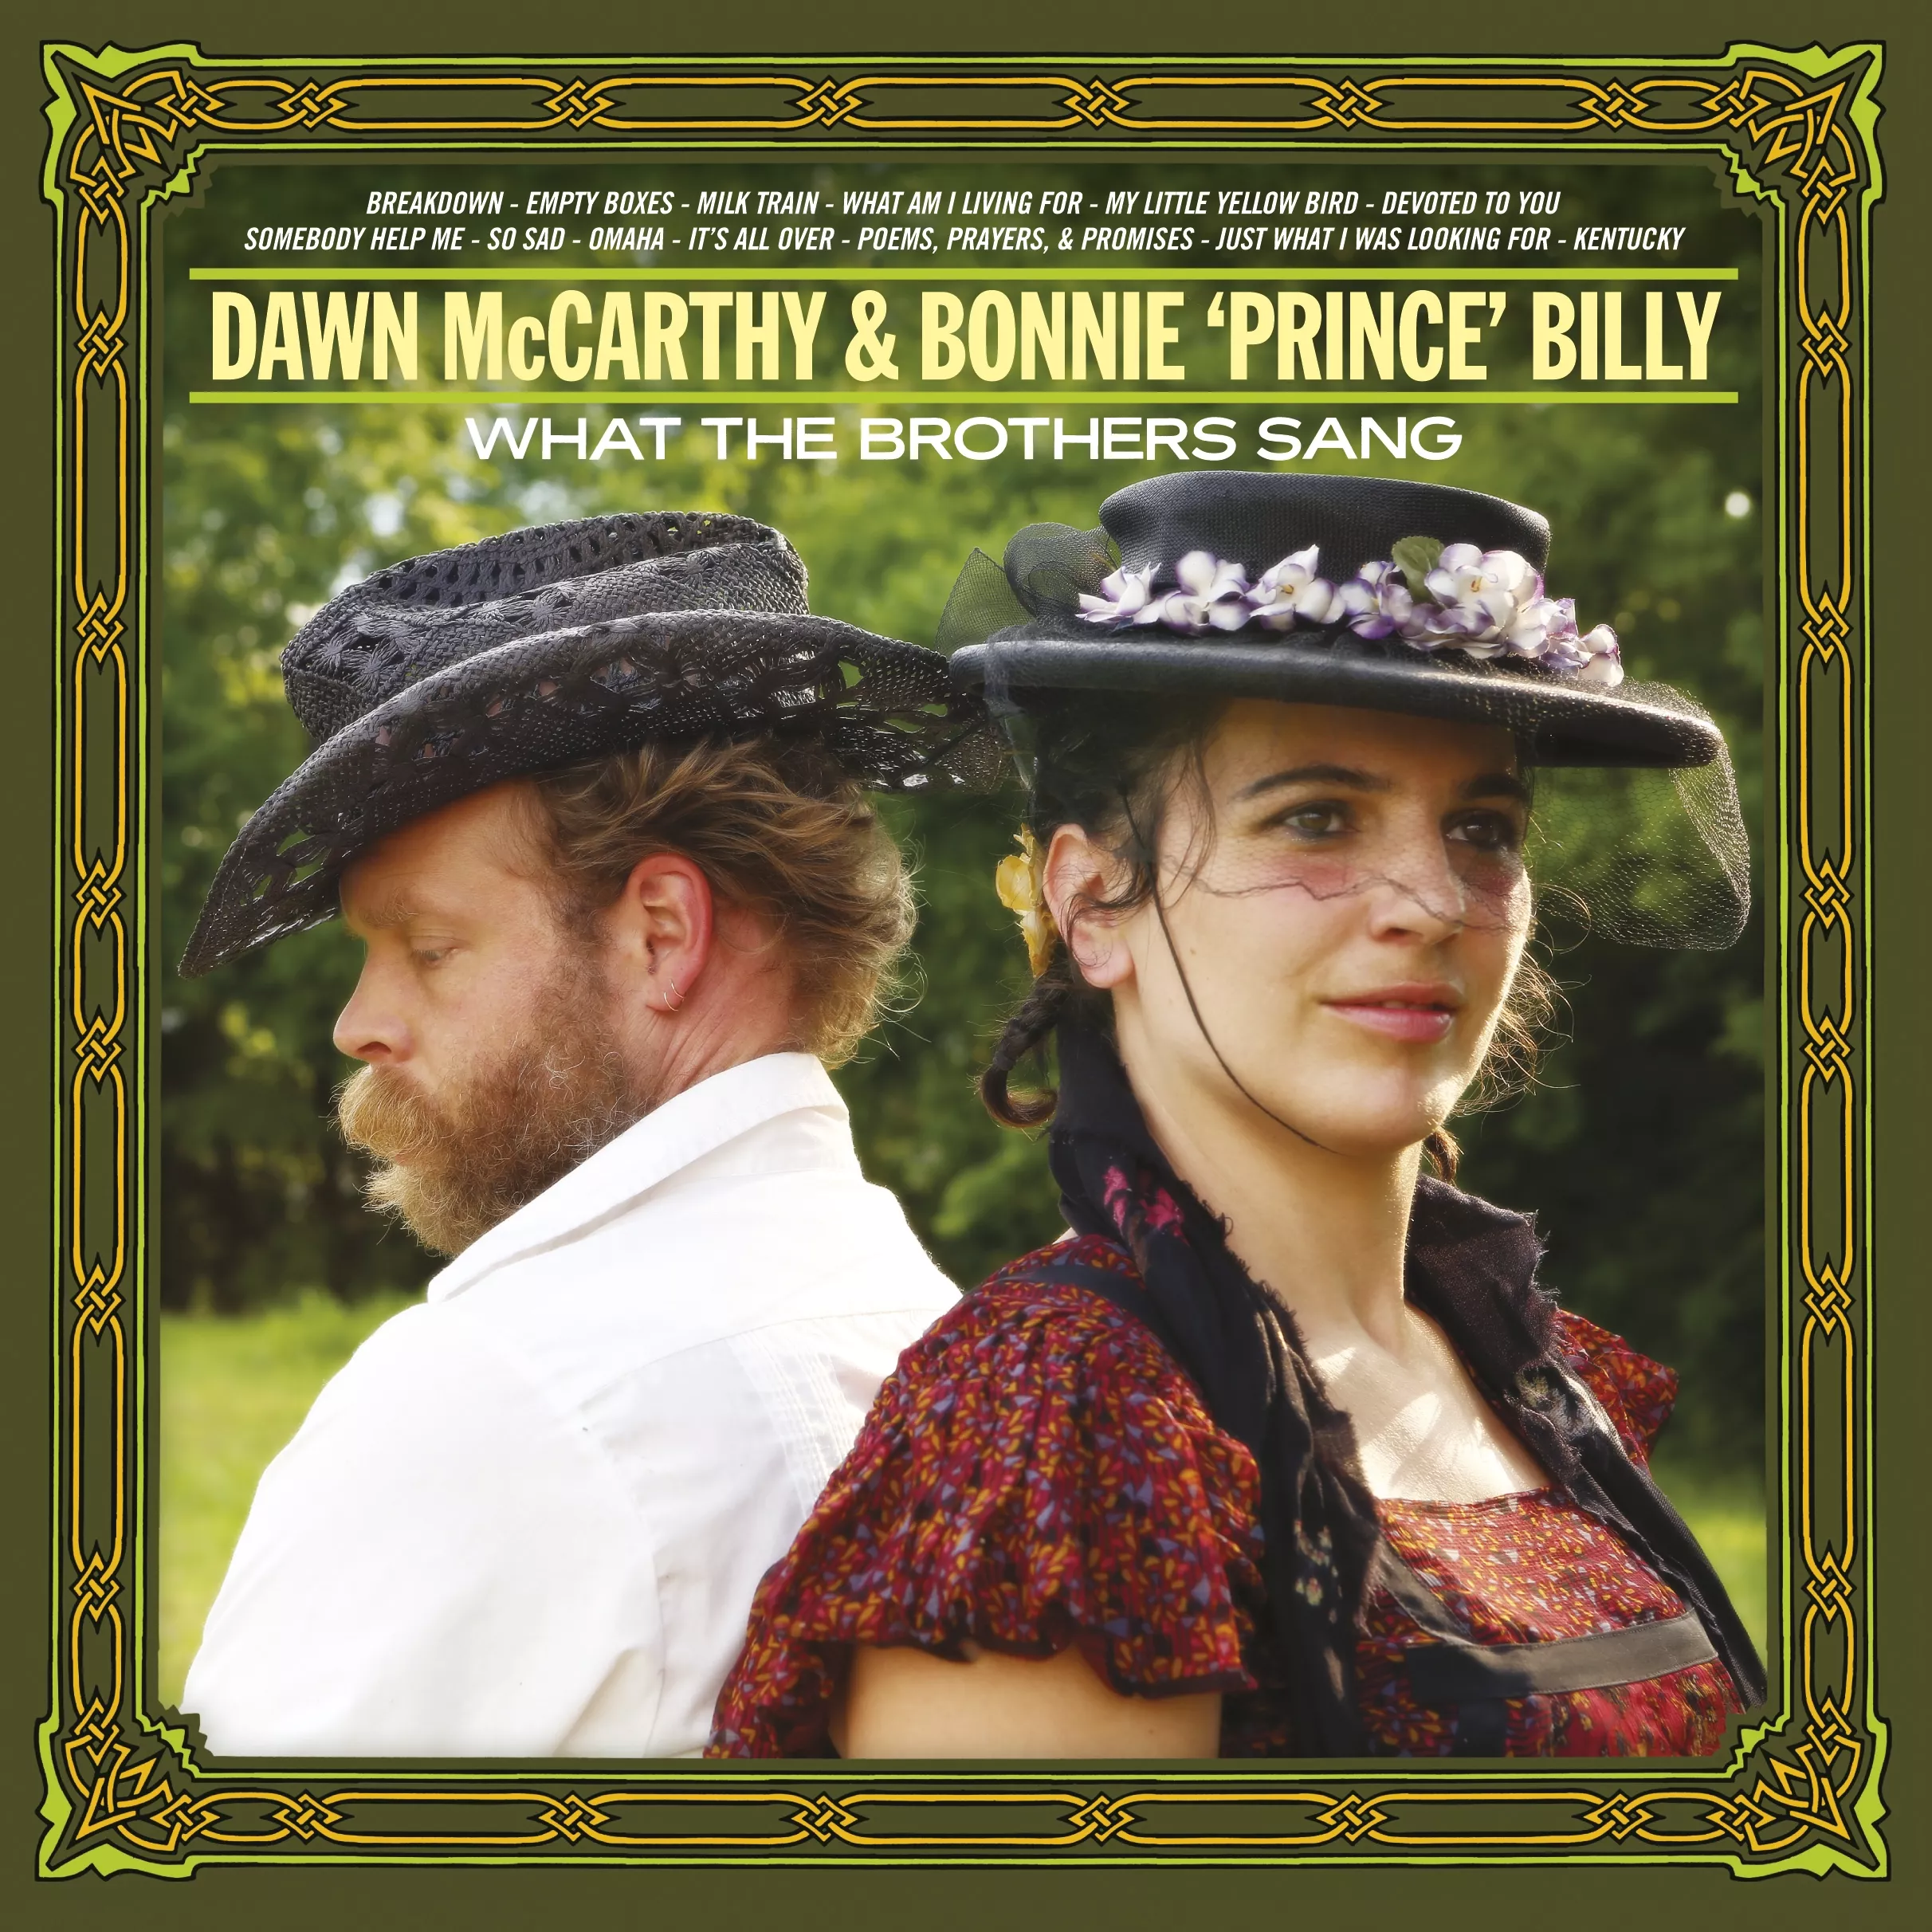 What The Brothers Sang - Dawn McCarthy & Bonnie 'Prince' Billy